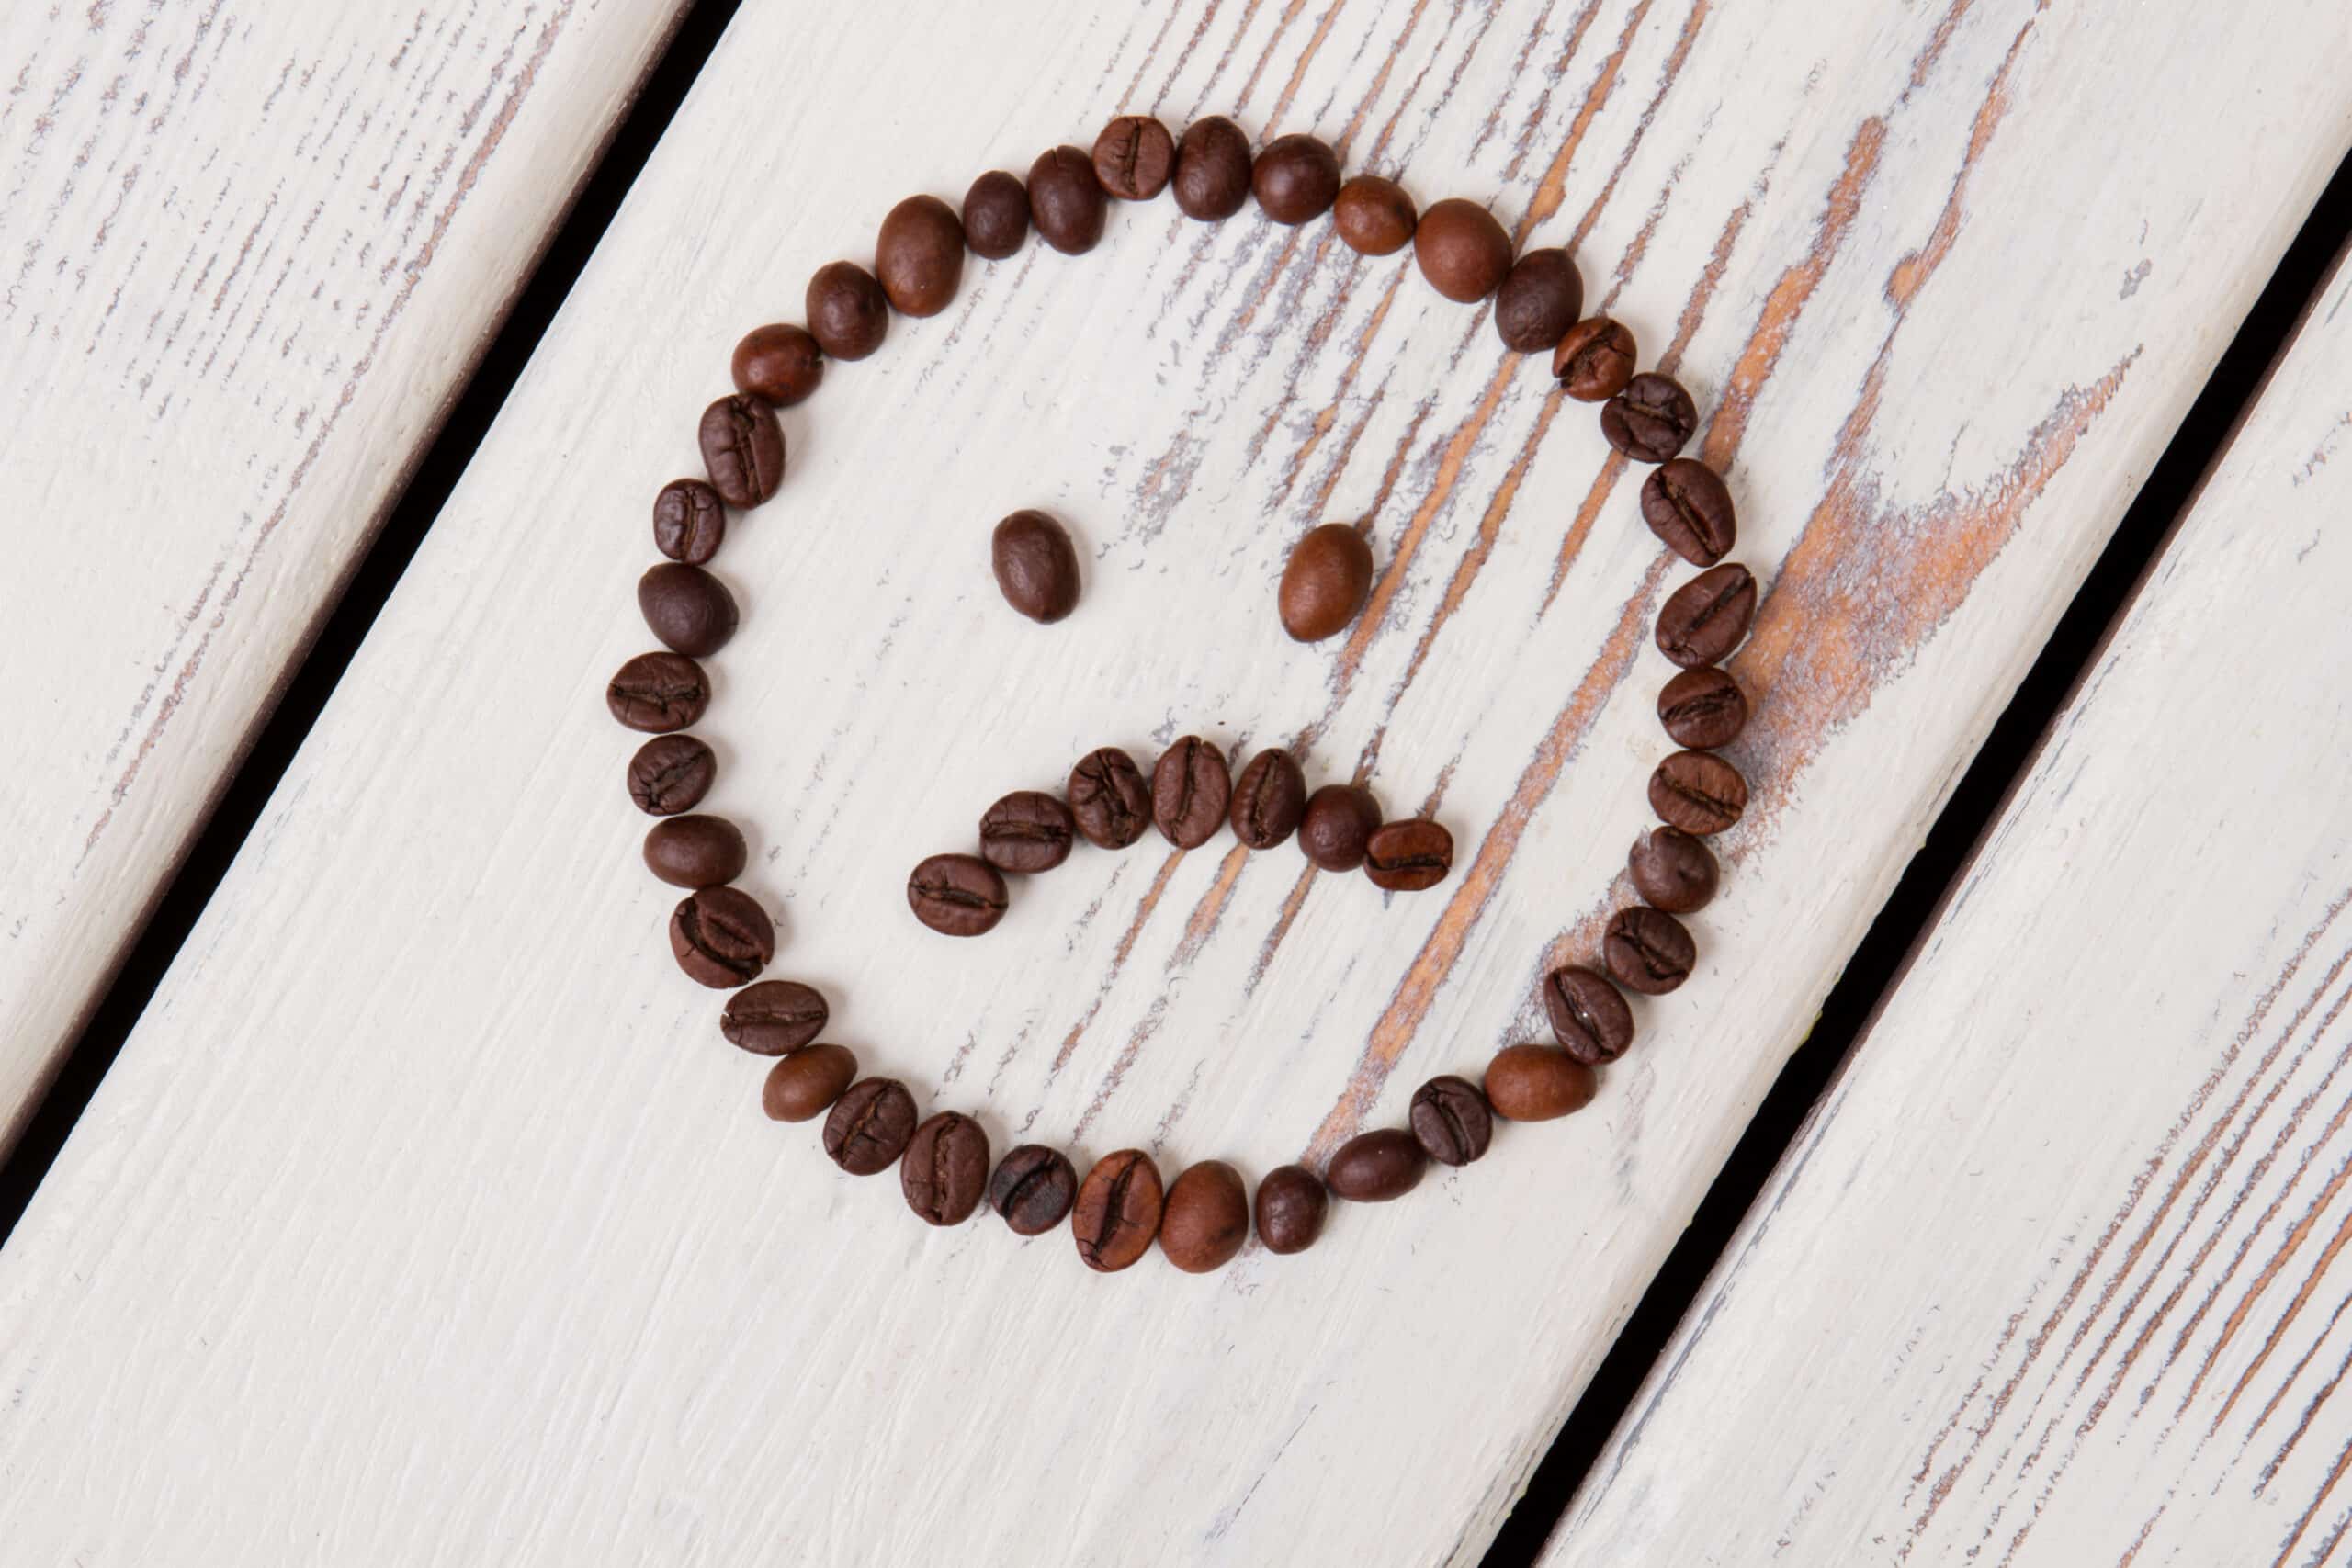 sad smiley face made of coffee beans 2021 12 09 13 17 14 utc scaled